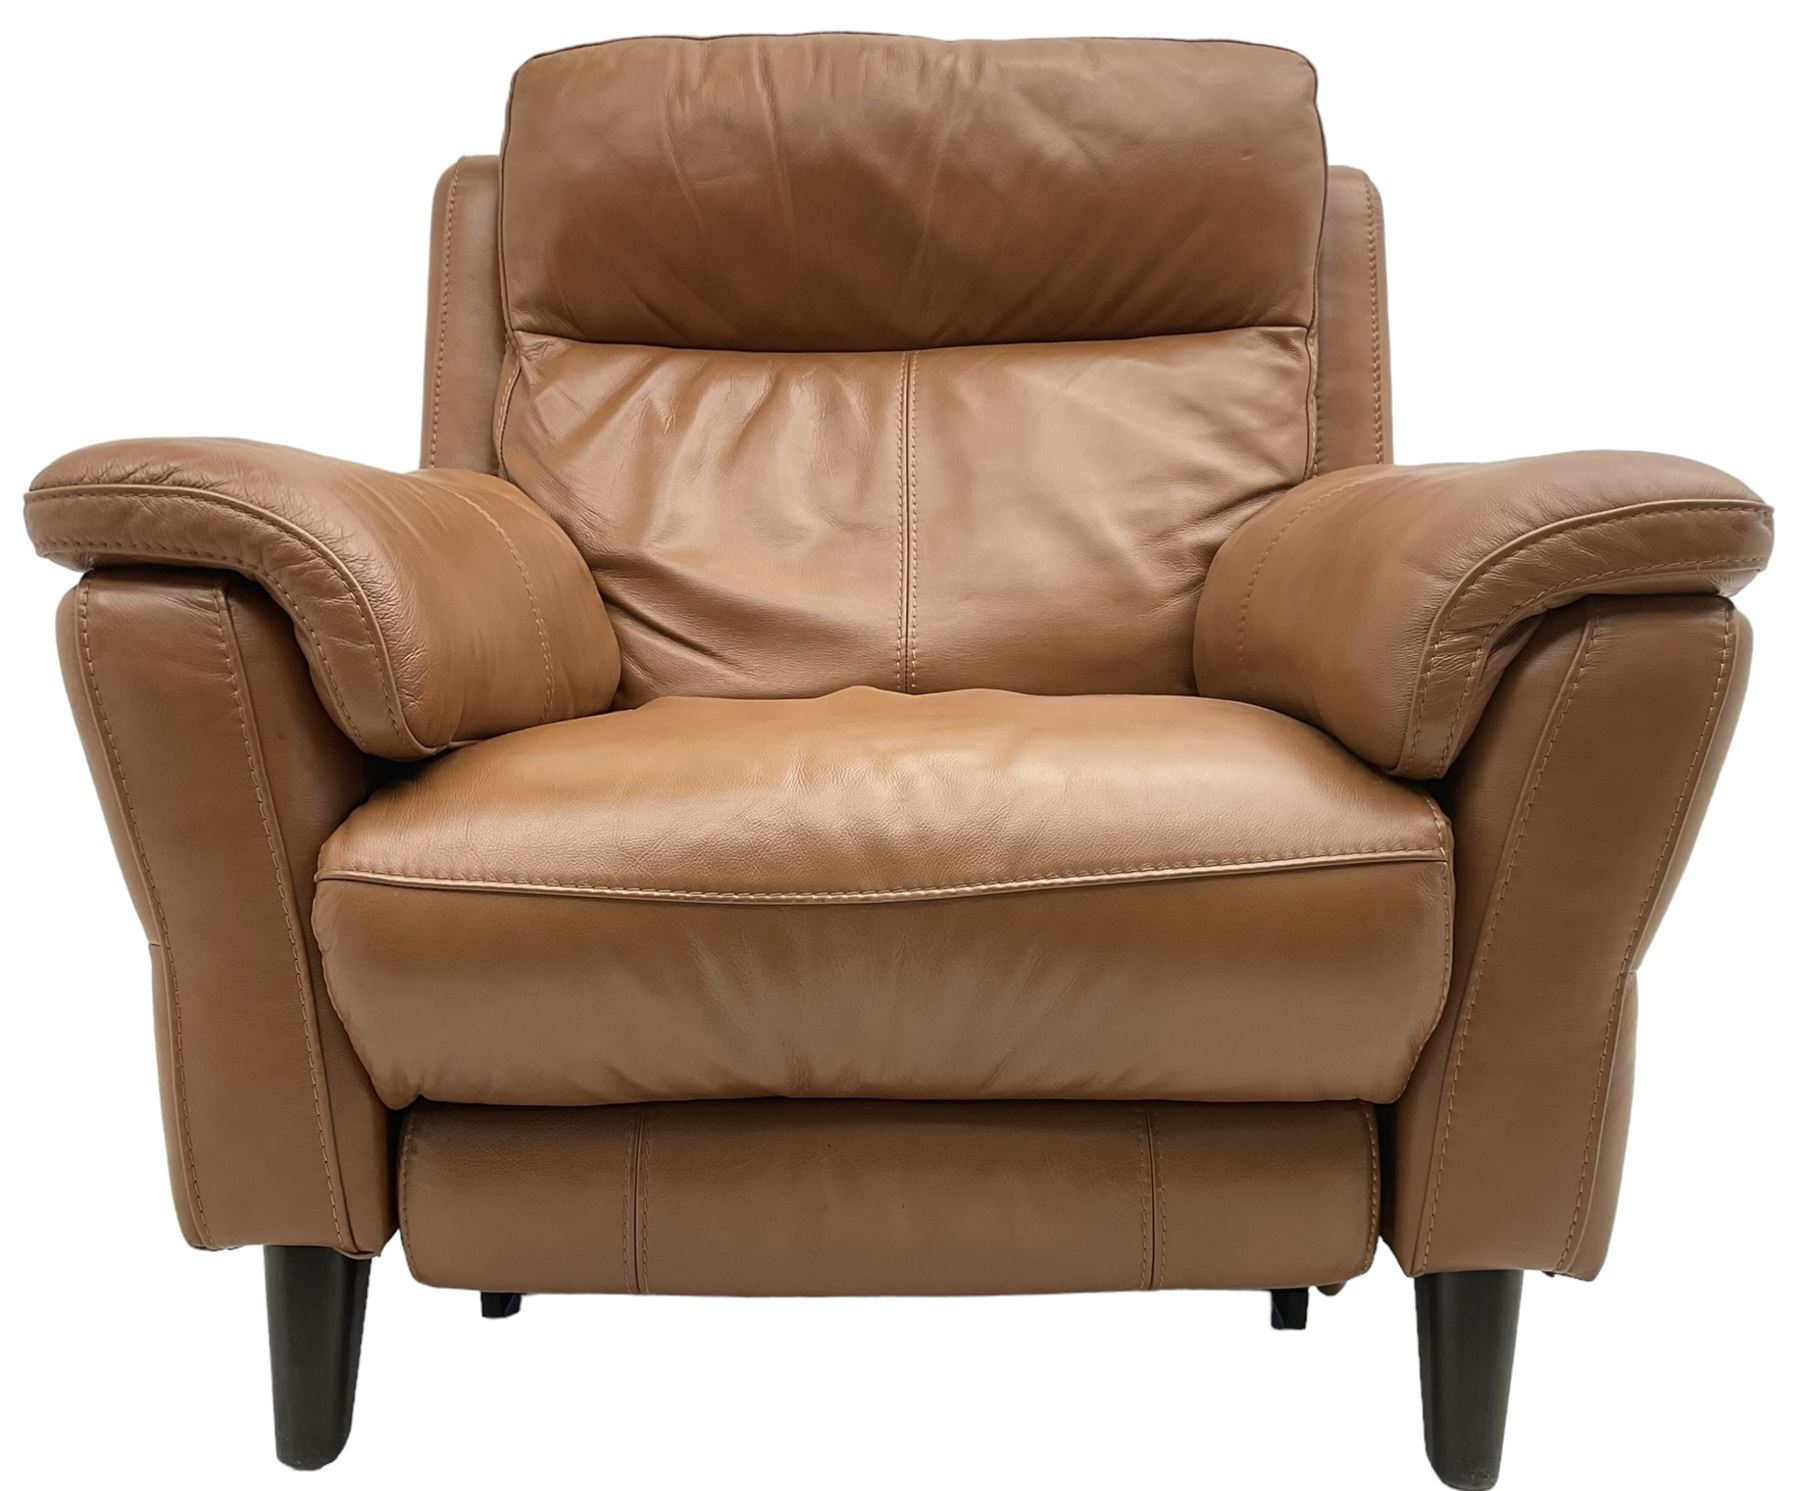 Electric reclining armchair - Image 6 of 6